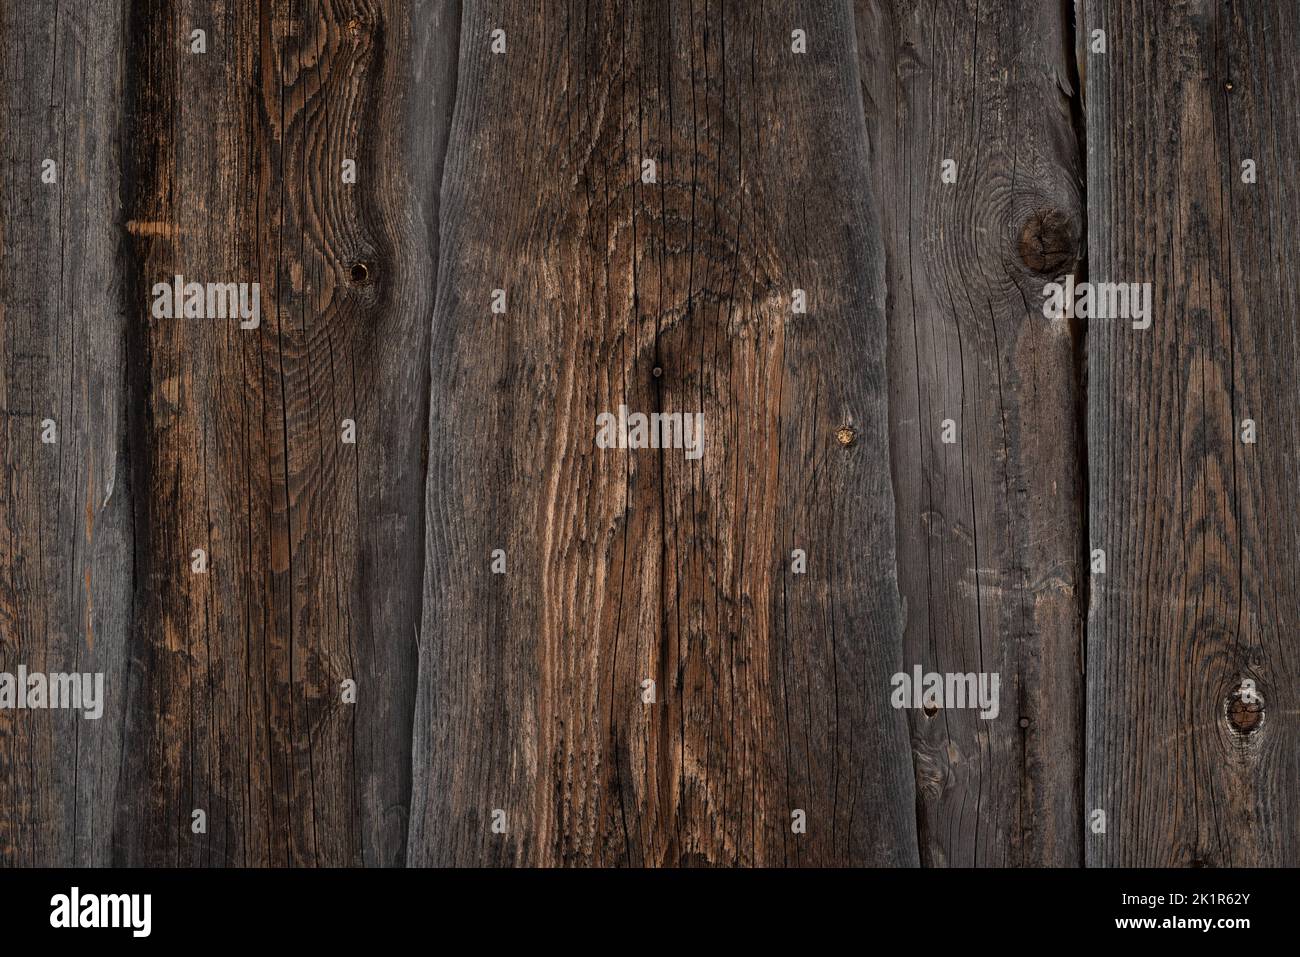 Brown background with natural texture of beautifully aged wooden planks Stock Photo